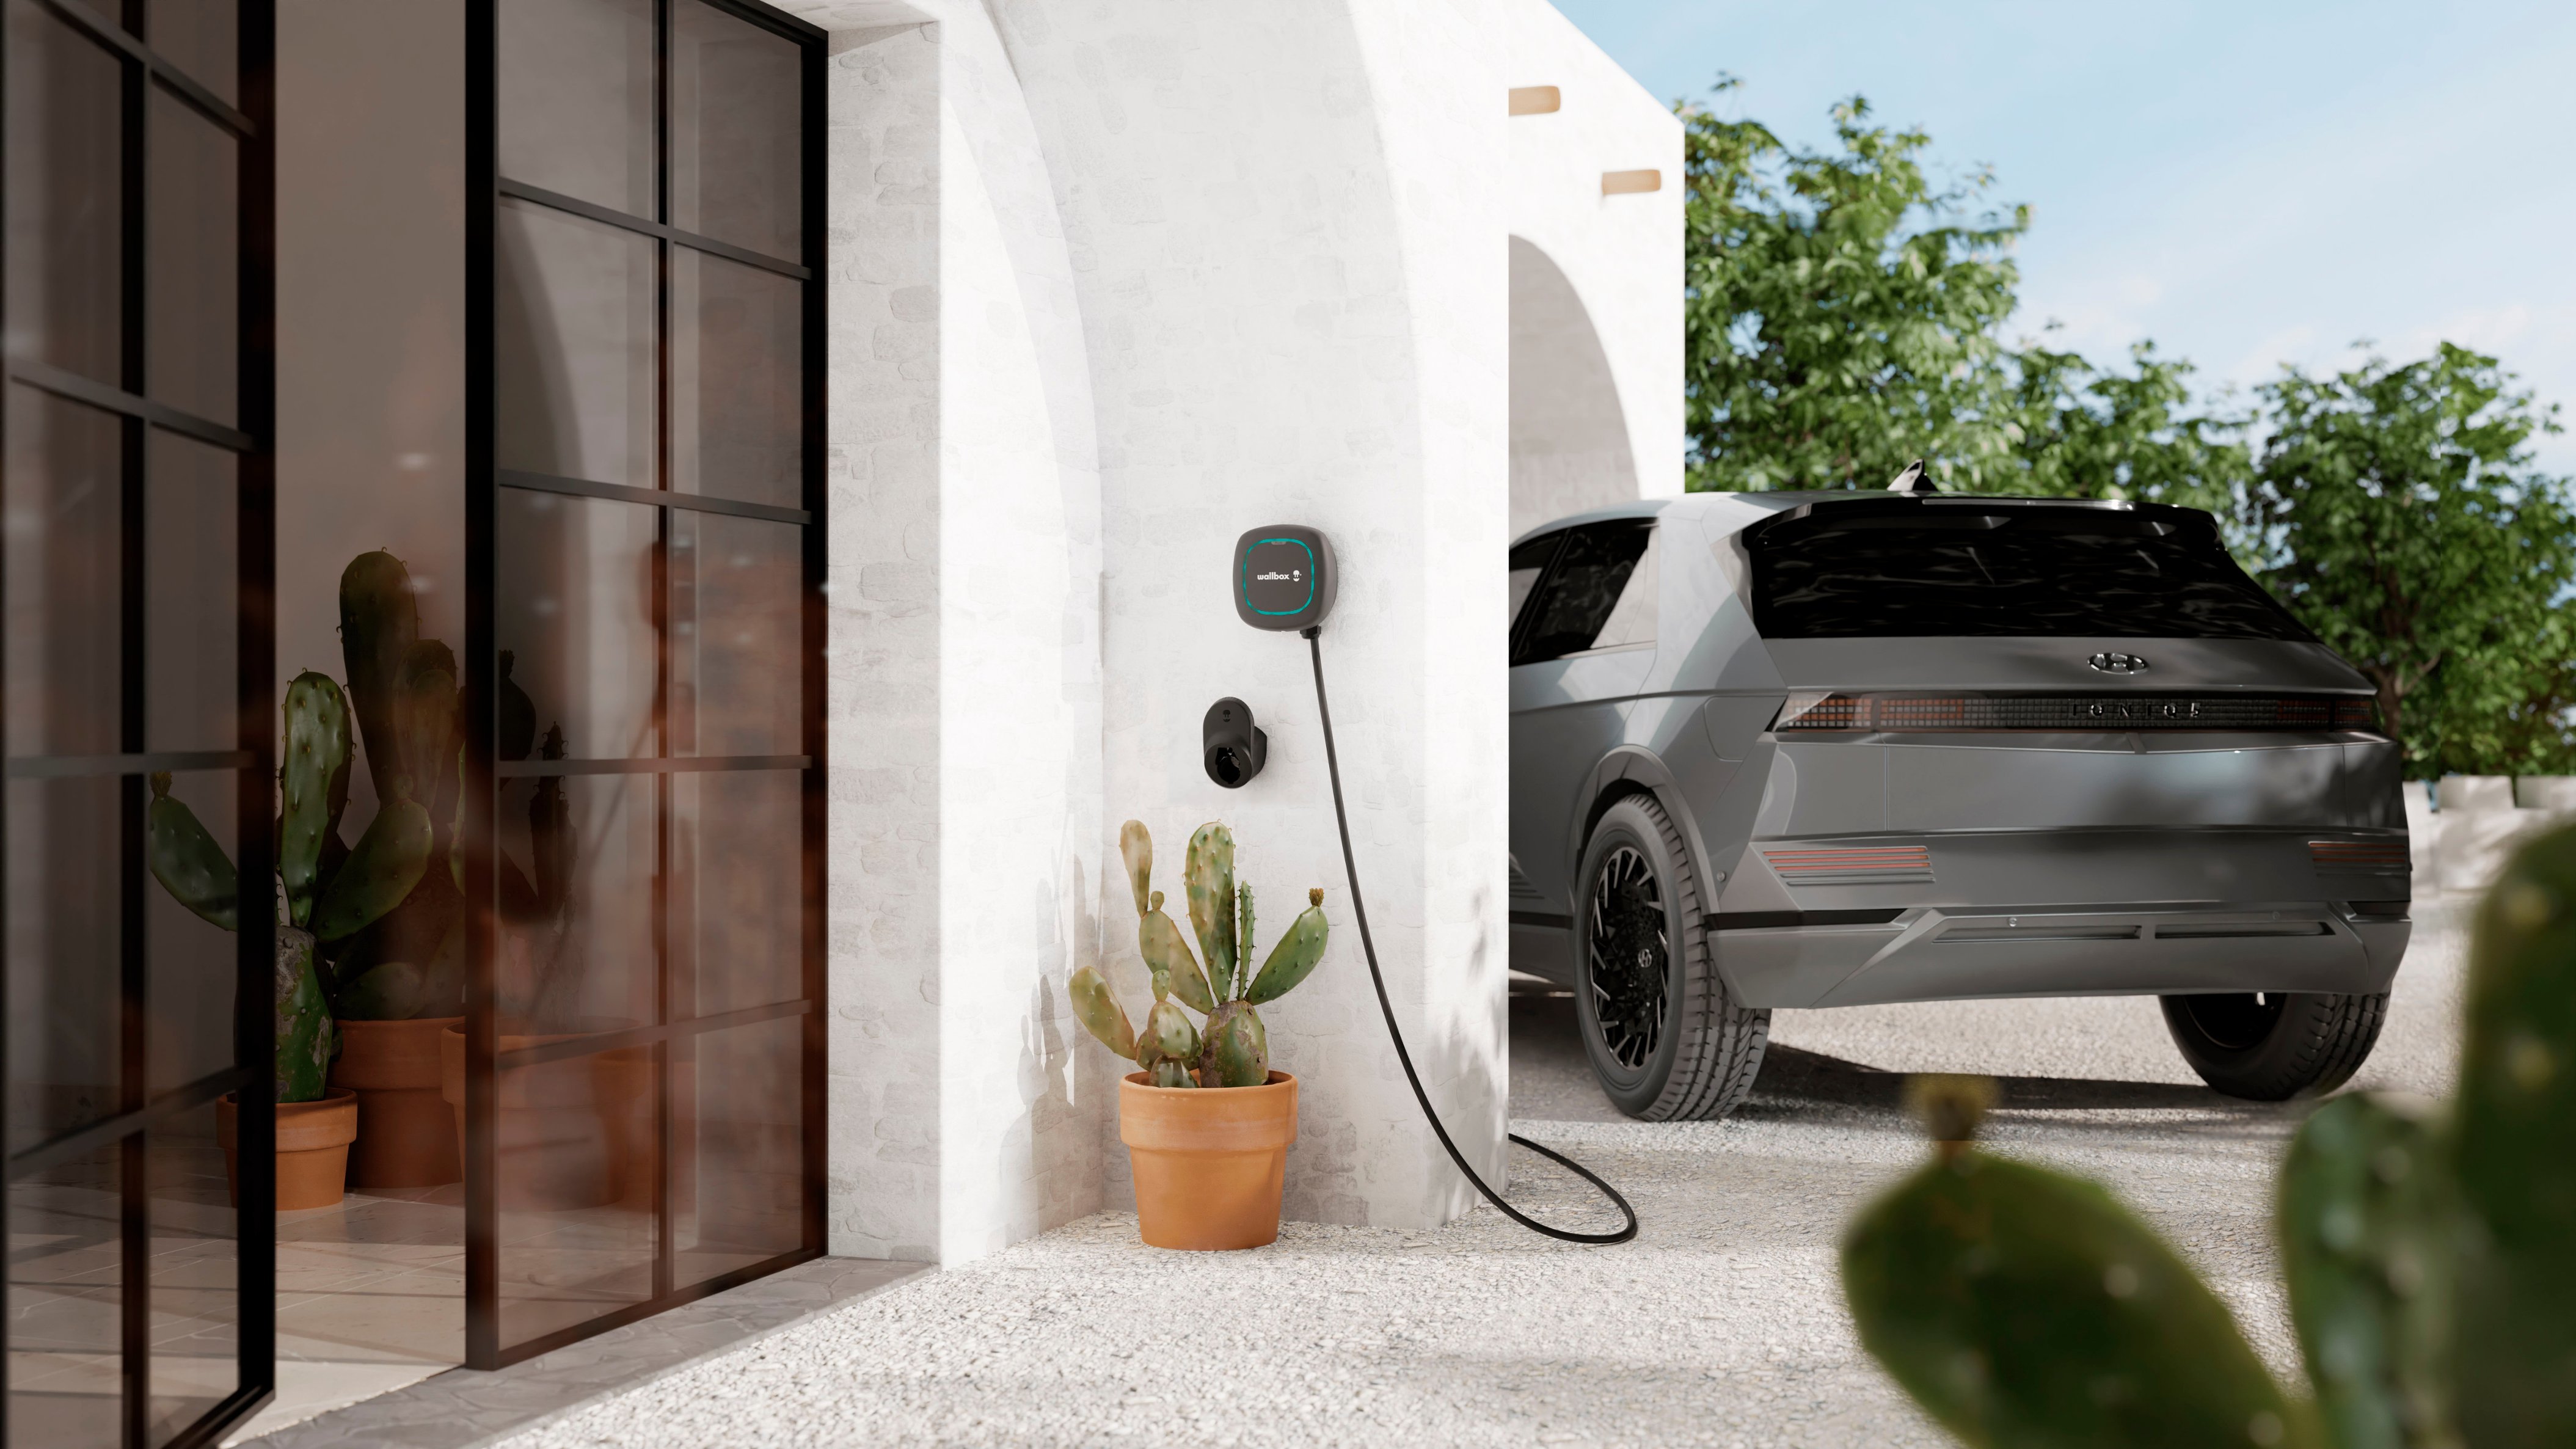 Wallbox Pulsar Plus L2 EV Smart Charger - 48A (Installation Included)